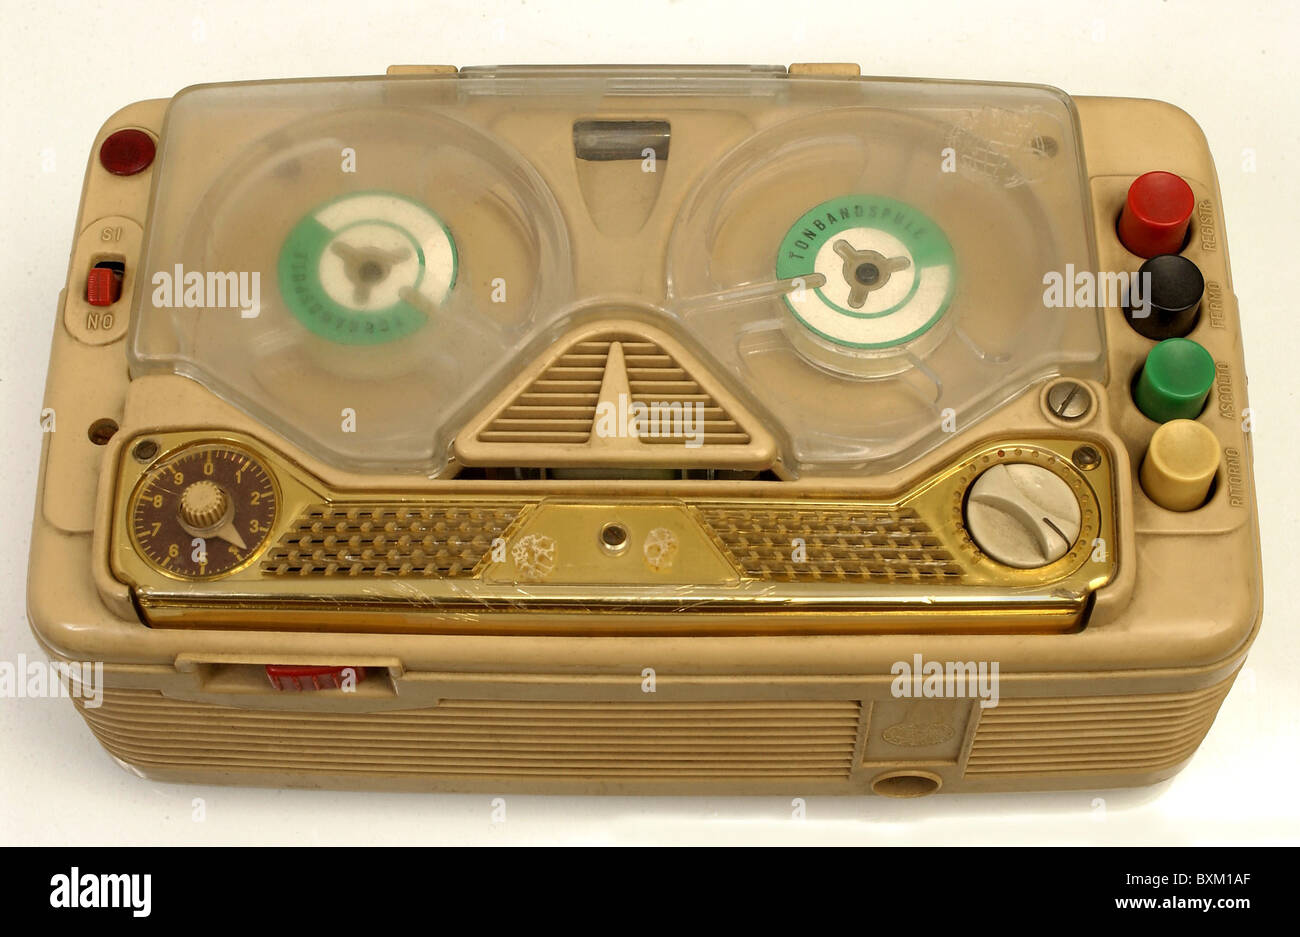 technics, tape recorder, Geloso G256, Italy, 1959, tape recorders, technics, historic, historical, 1950s, 50s, 20th century, compact, weight: 3 kilogram, mono, audio, device, Additional-Rights-Clearences-Not Available Stock Photo